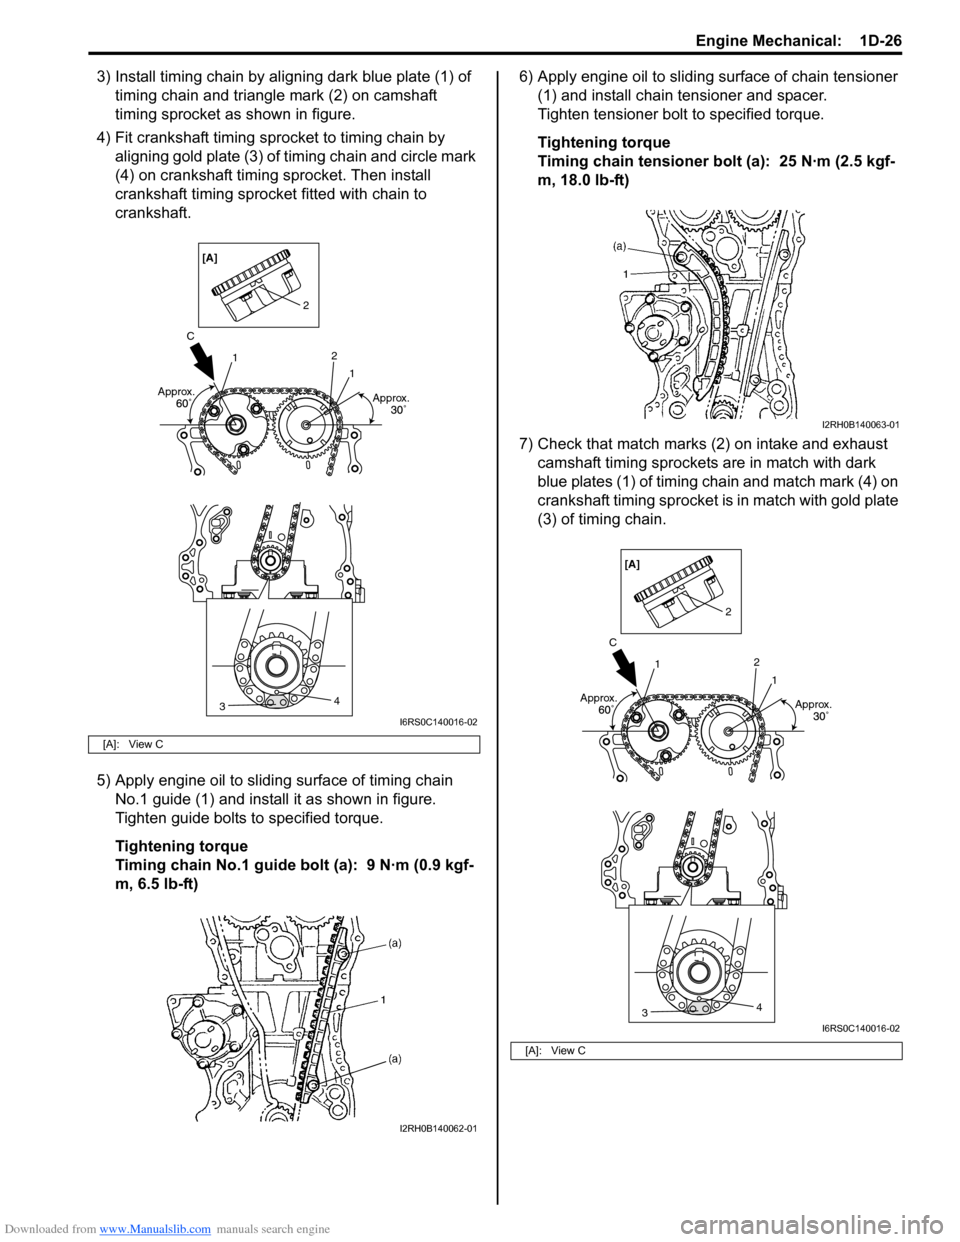 SUZUKI SWIFT 2007 2.G Service User Guide Downloaded from www.Manualslib.com manuals search engine Engine Mechanical:  1D-26
3) Install timing chain by aligning dark blue plate (1) of timing chain and triangle mark (2) on camshaft 
timing spr